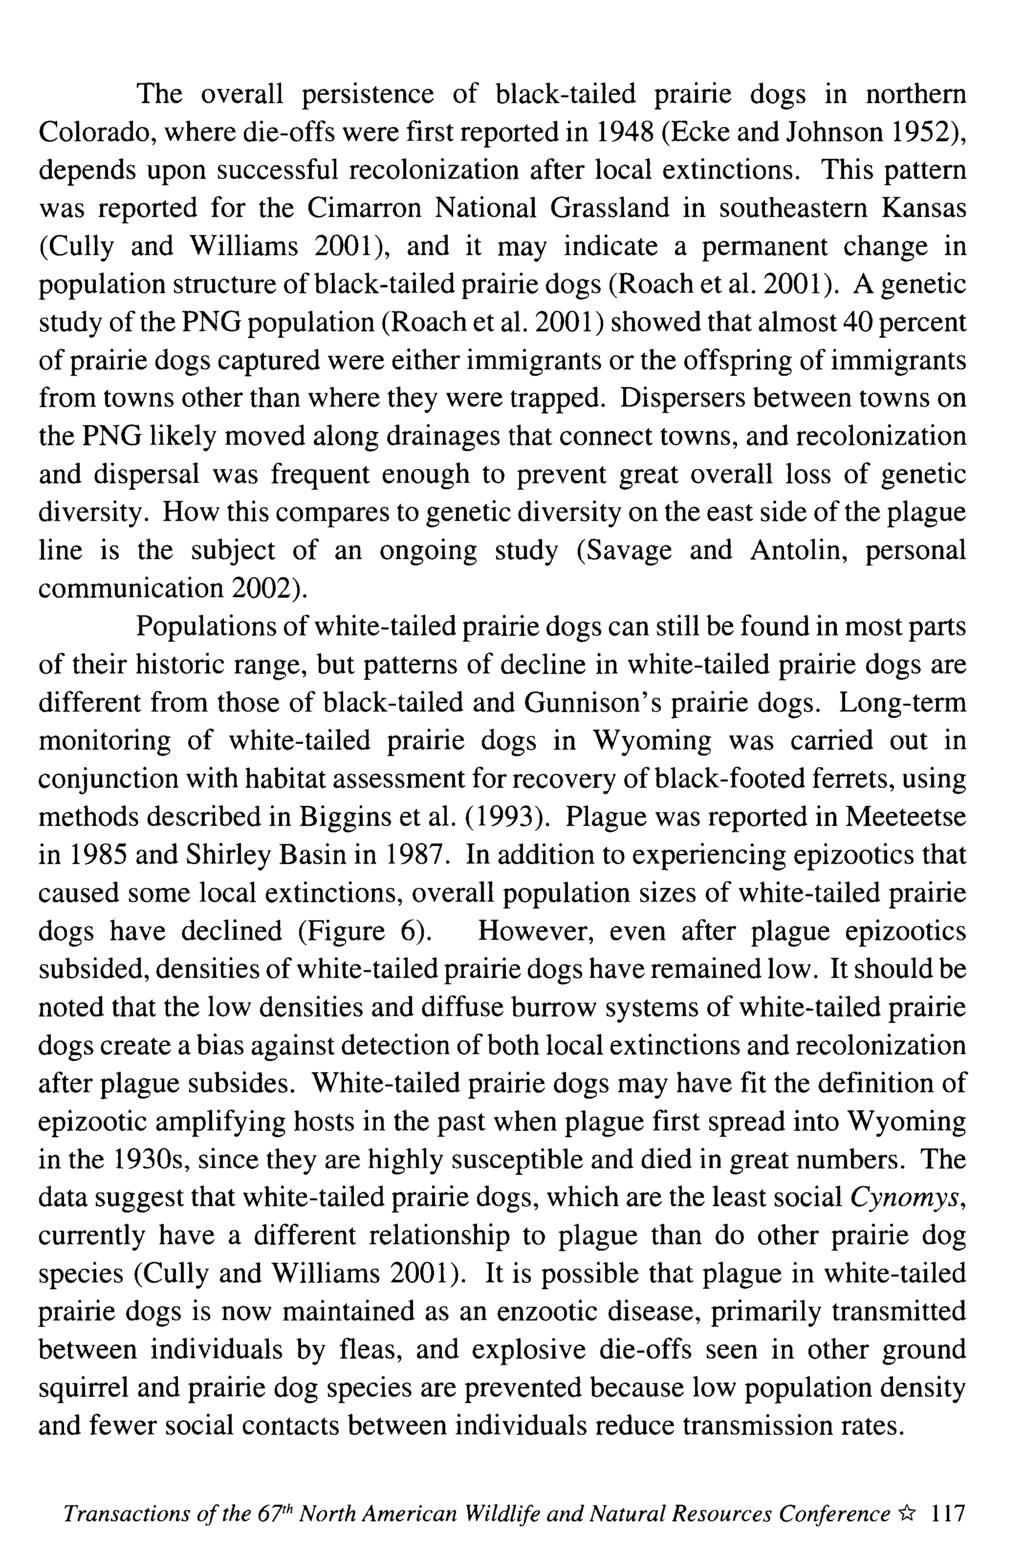 The overall persistence of black-tailed prmne dogs in northern Colorado, where die-offs were first reported in 1948 (Ecke and Johnson 1952), depends upon successful recolonization after local